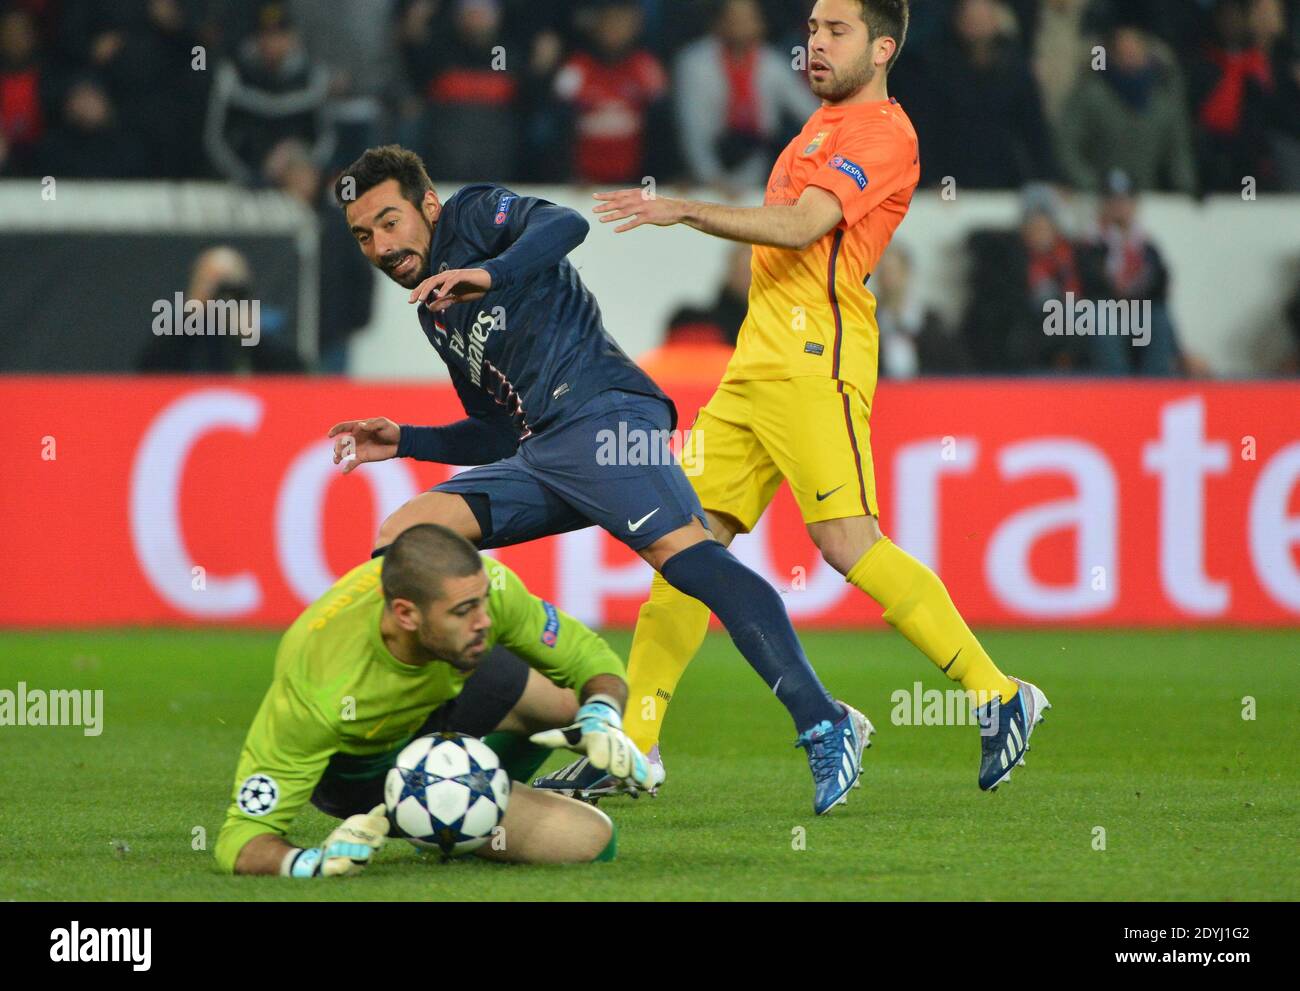 PSG's Ezequiel Lavezzi and Barcelona's goalkeeper Victor Valdes and Sergio Busquets during the UEFA Champions League Quarter-Final First Leg soccer match, Paris Saint-Germain Vs FC Barcelona at Parc des Princes in Paris, France on April 2, 2013. The match ended in a 2-2 drawPhoto by Christian Liewig/ABACAPRESS.COM Stock Photo